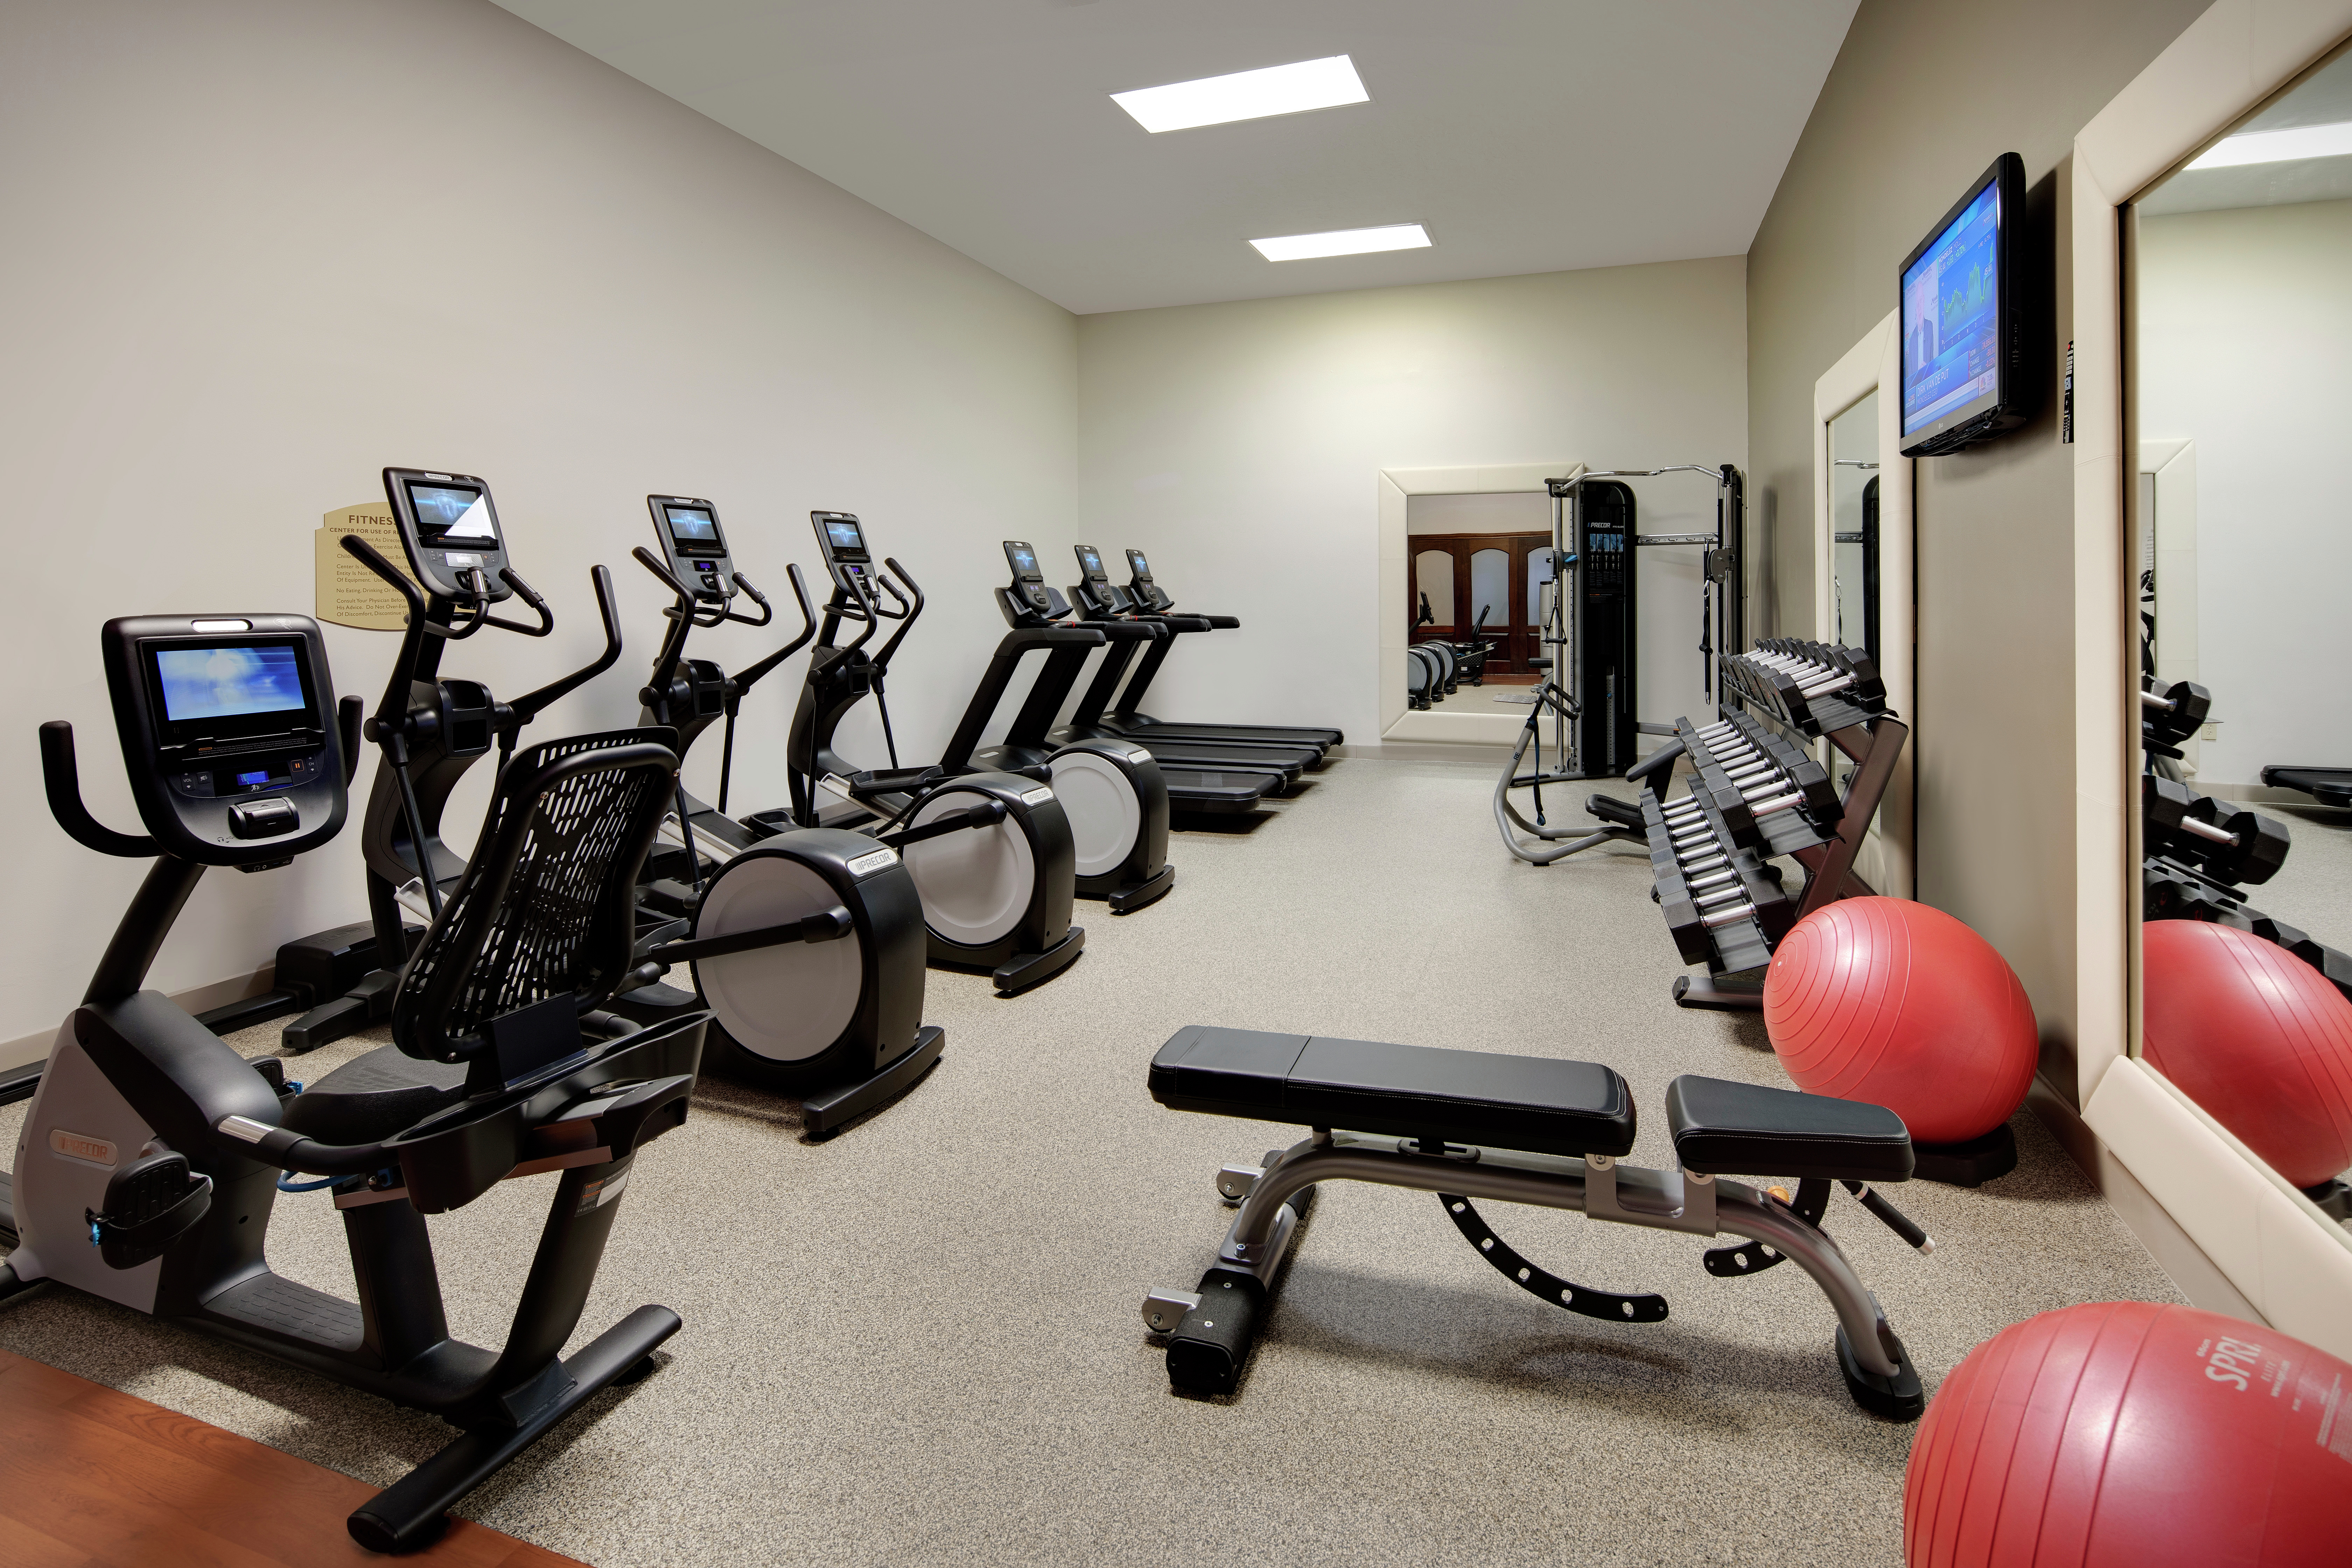 Fitness Center with Treadmills, Elliptical Machines, Medicine Balls, Mirrors, and Room Technology